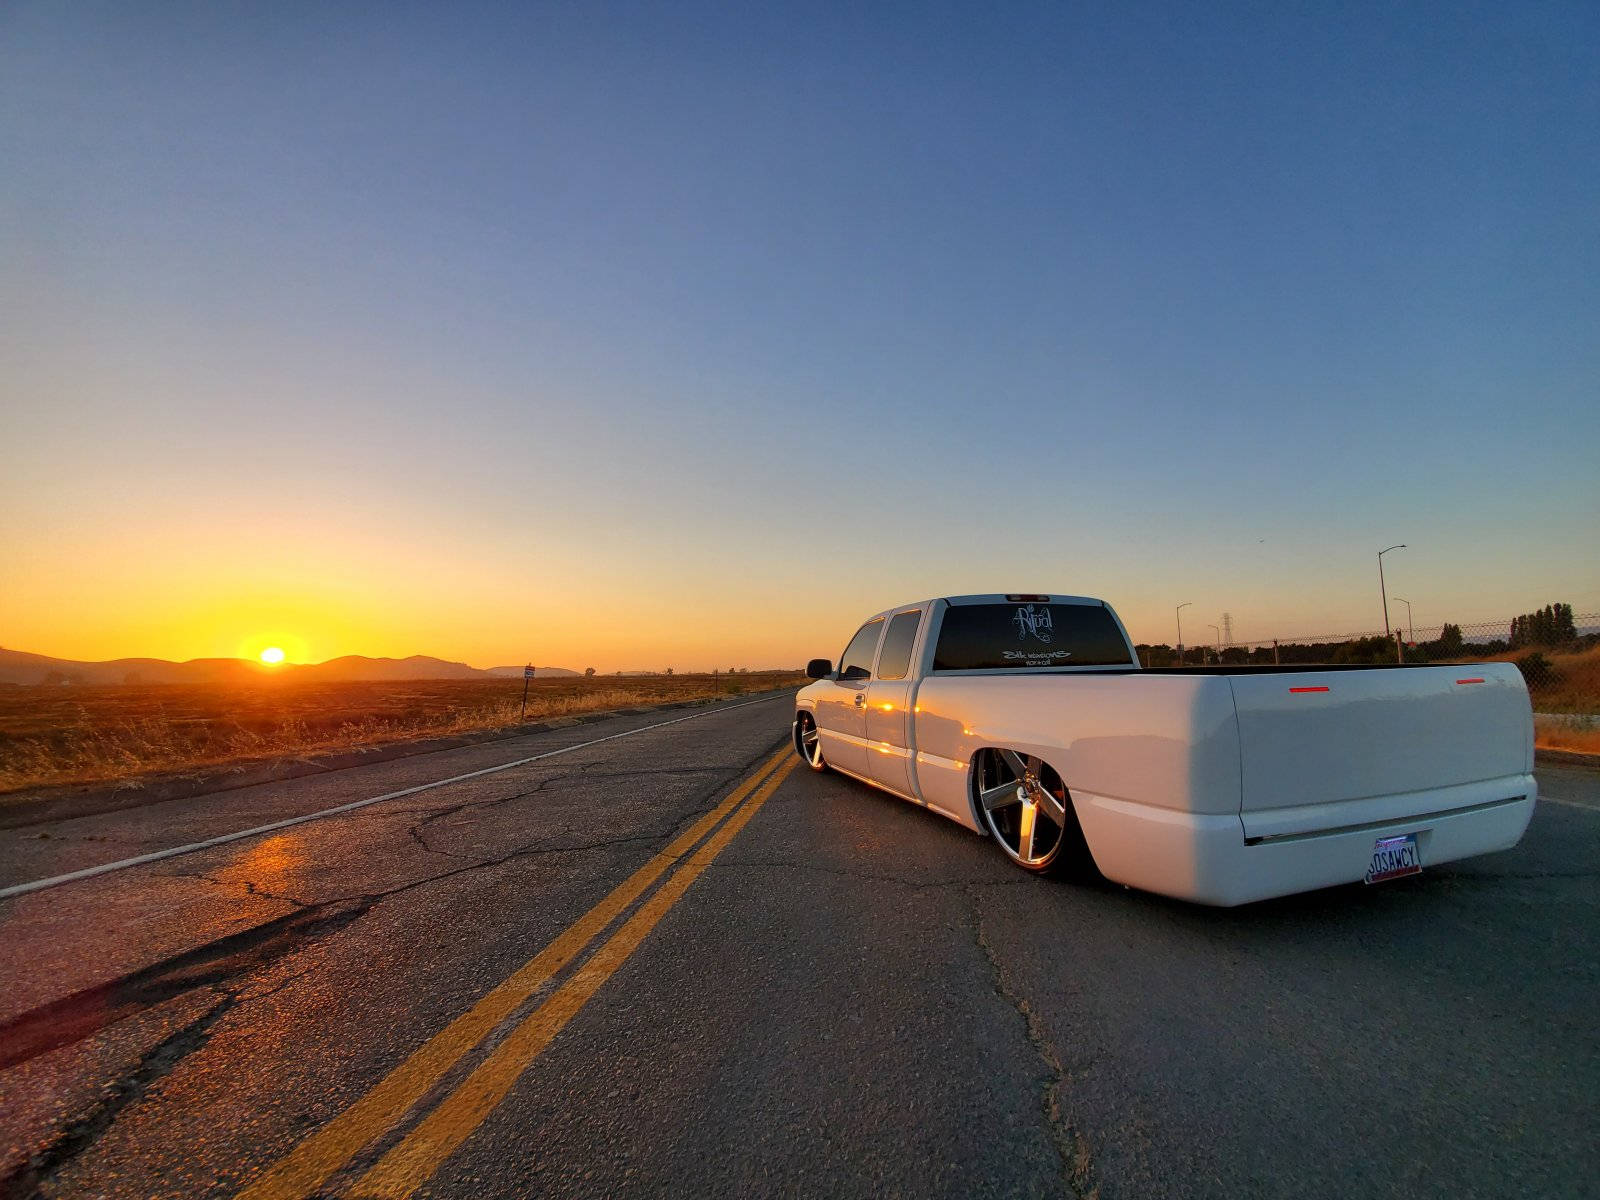 Dropped Truck During Sunset